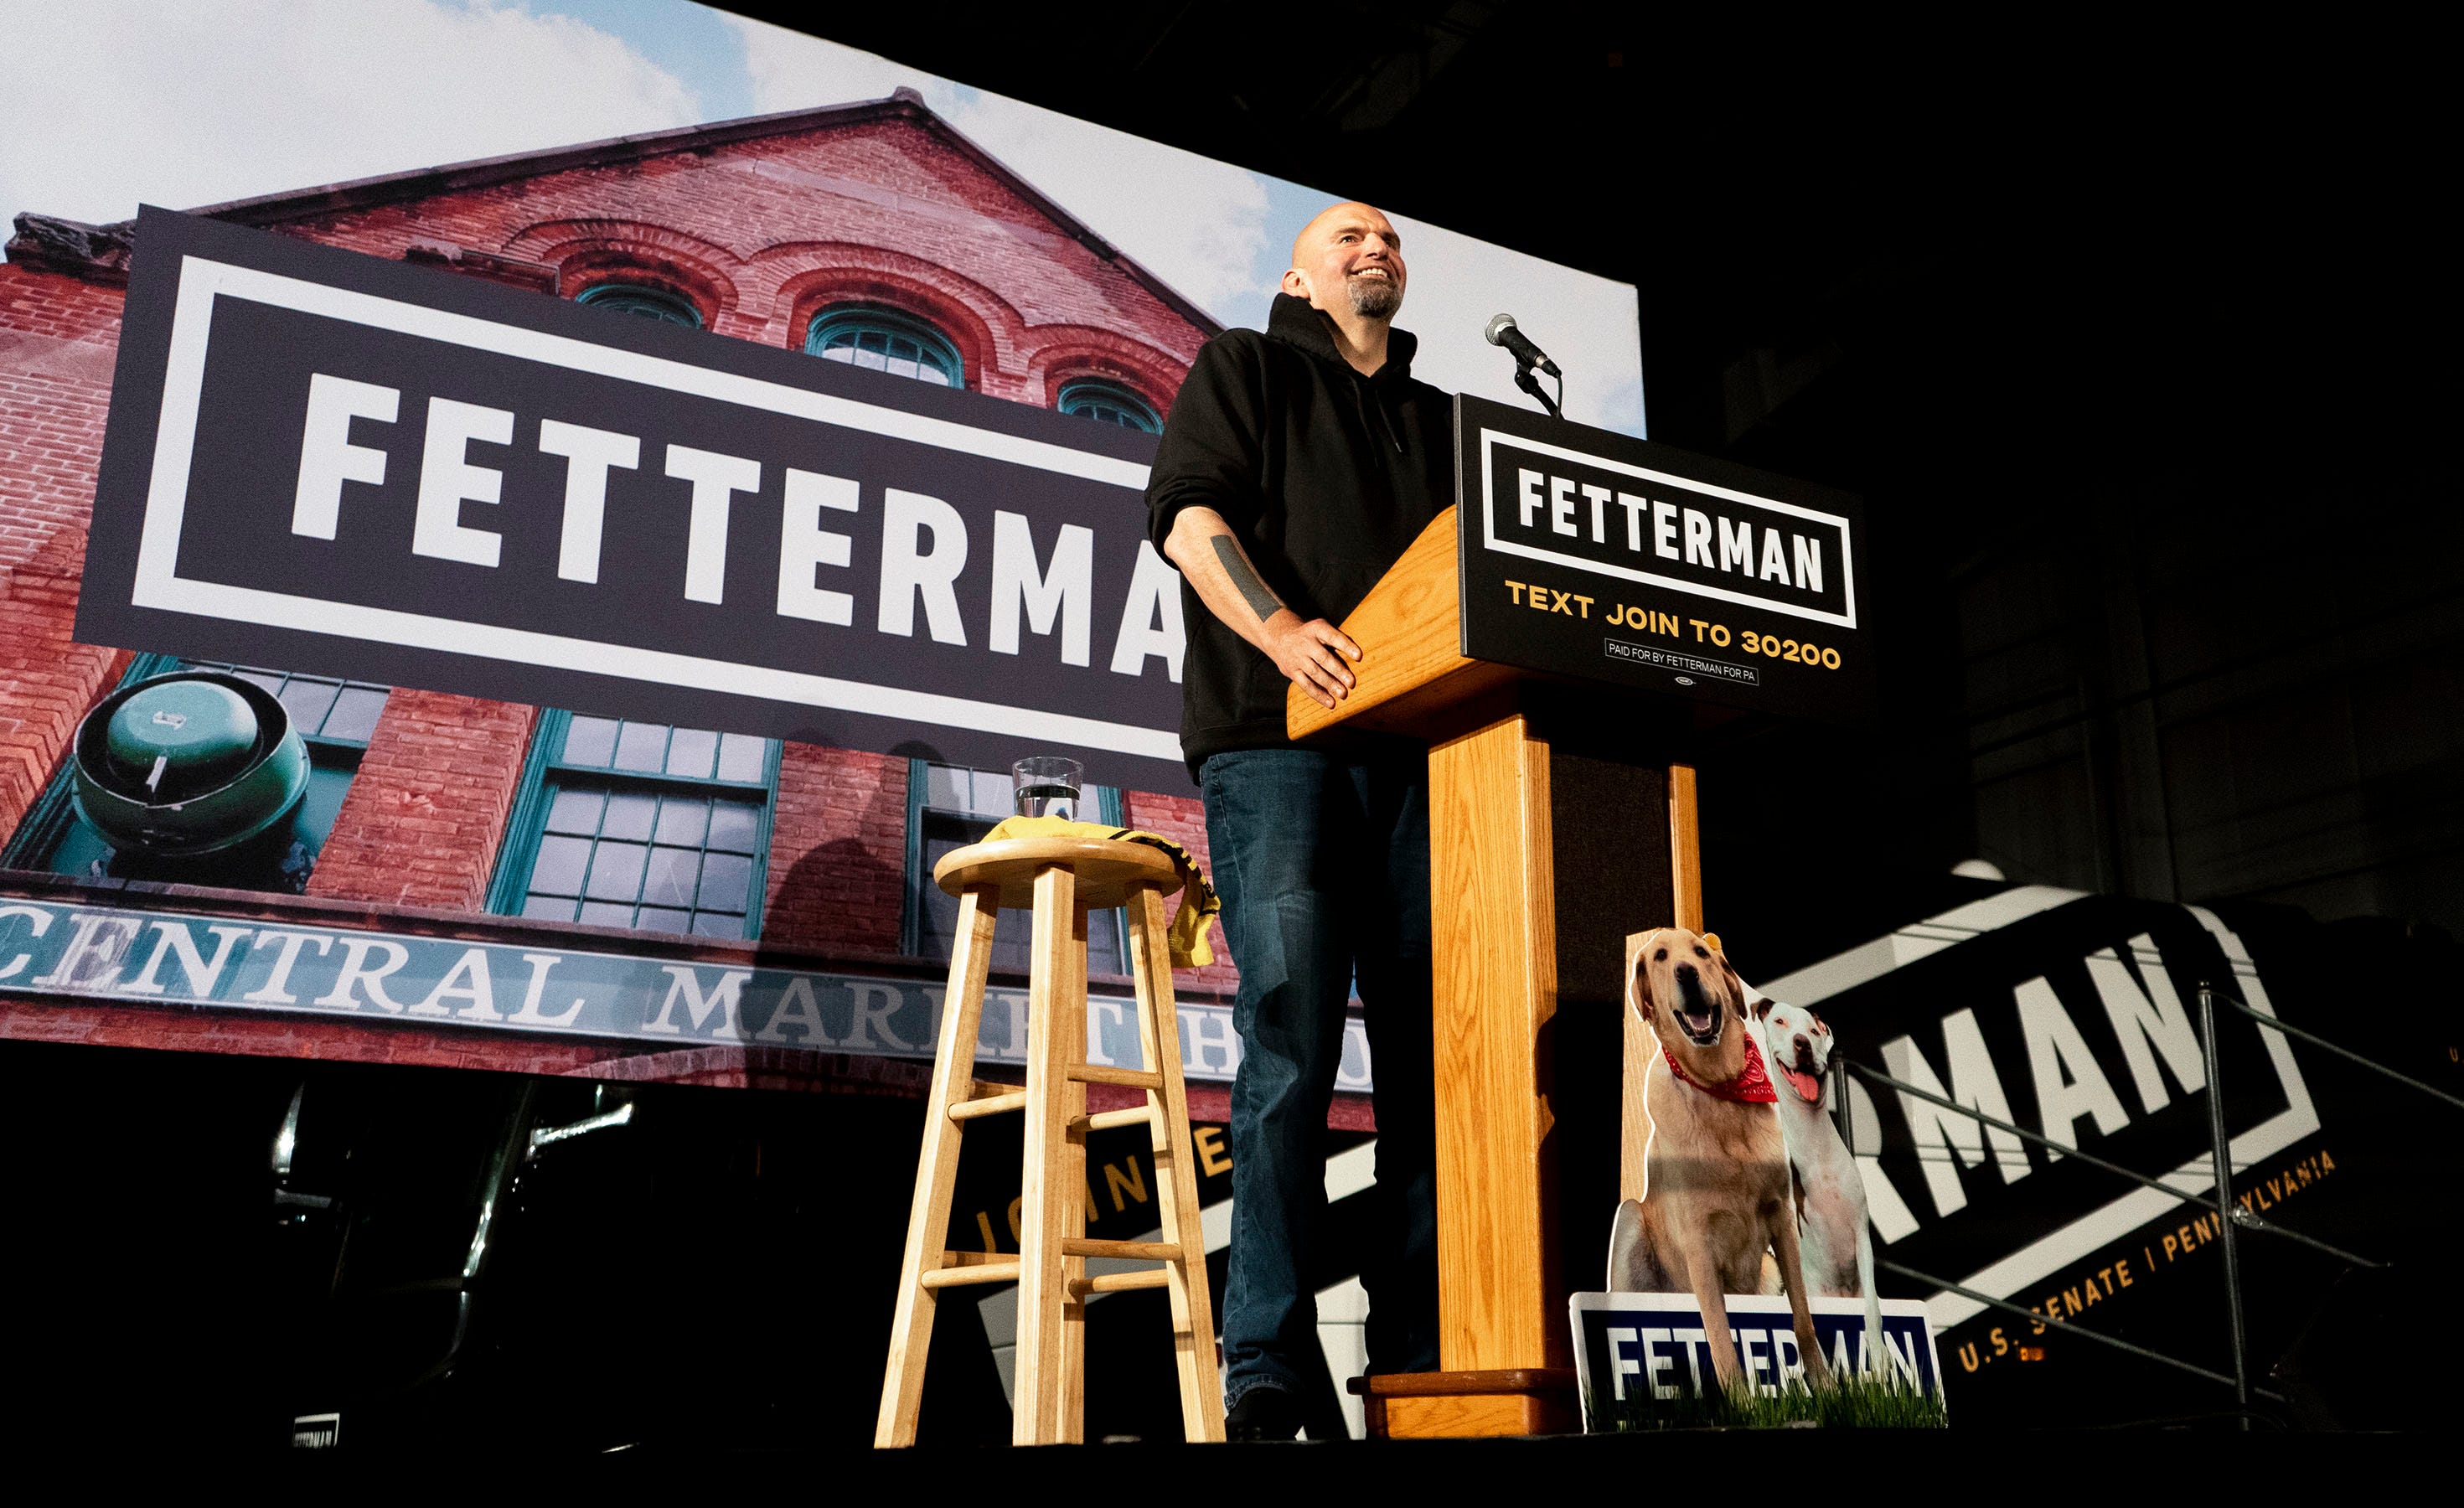 John Fetterman and guests rallying in York on Saturday, Oct. 8, 2022.